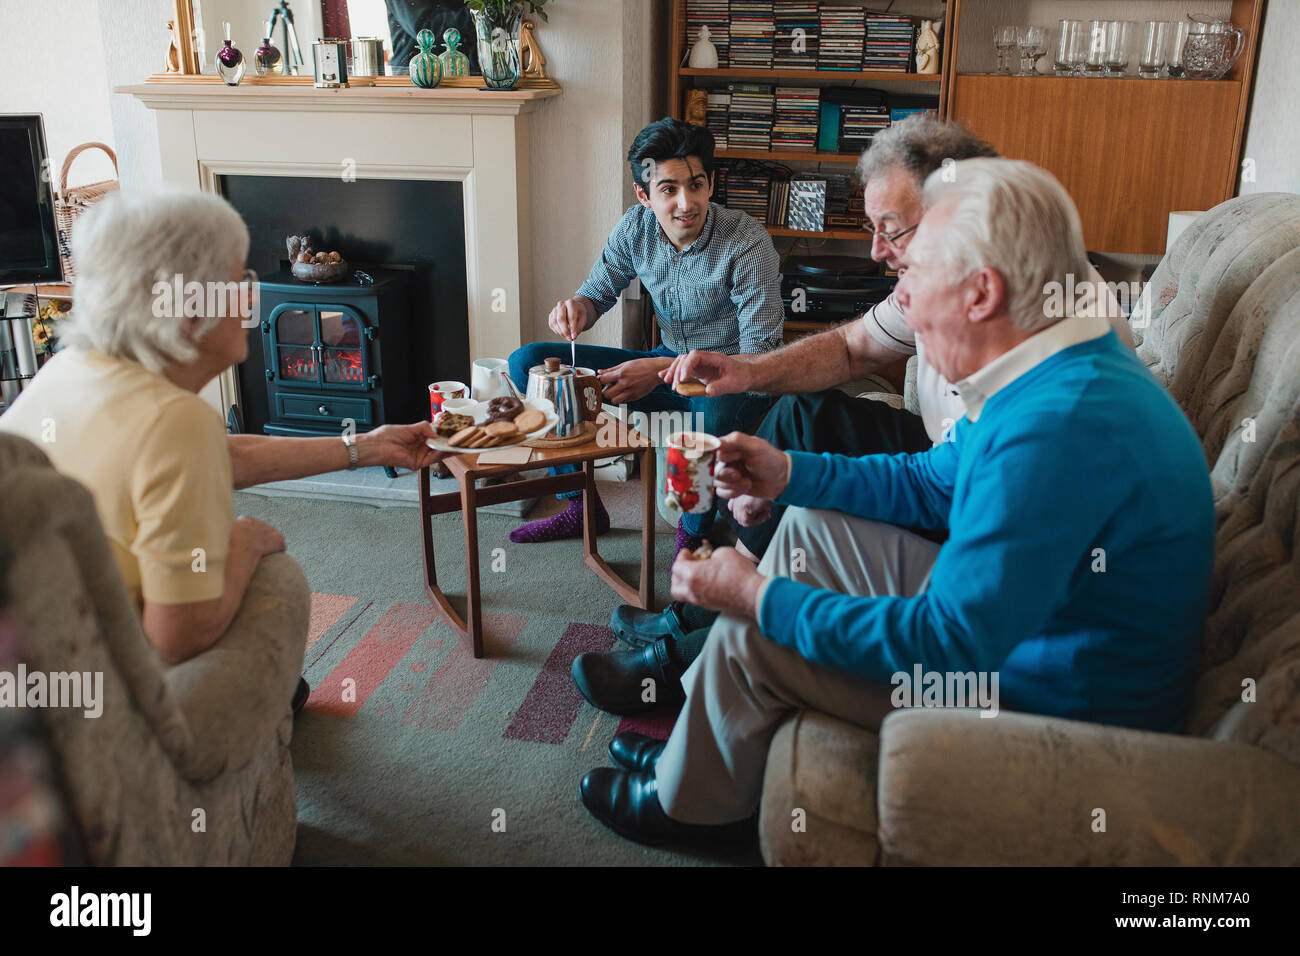 Teenage boy is assisting senior adults having a tea party at a nursing home. Stock Photo